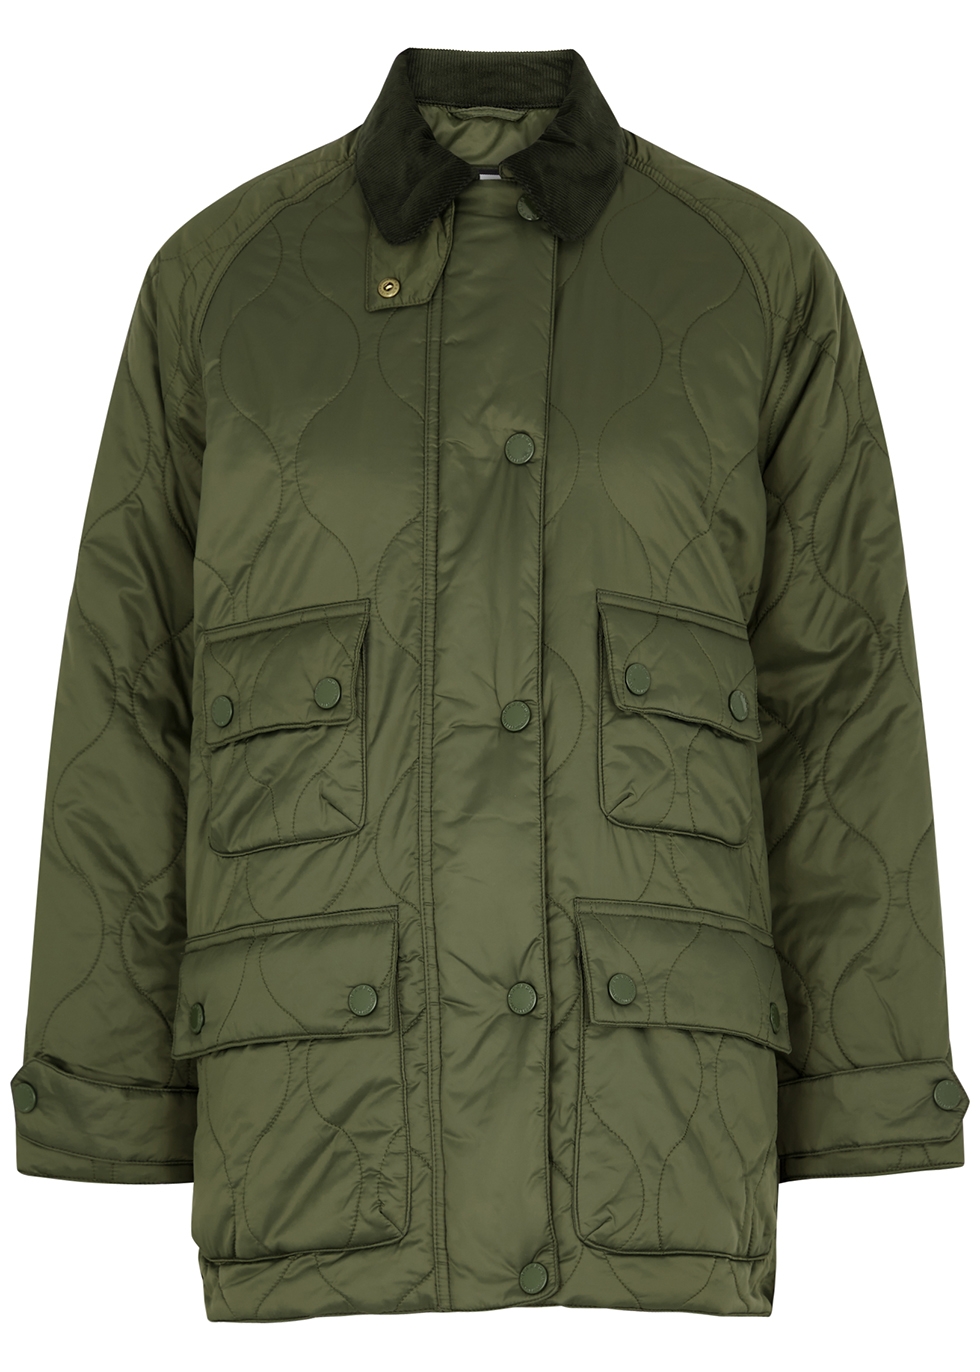 Barbour by ALEXACHUNG Myrtle army green quilted shell jacket